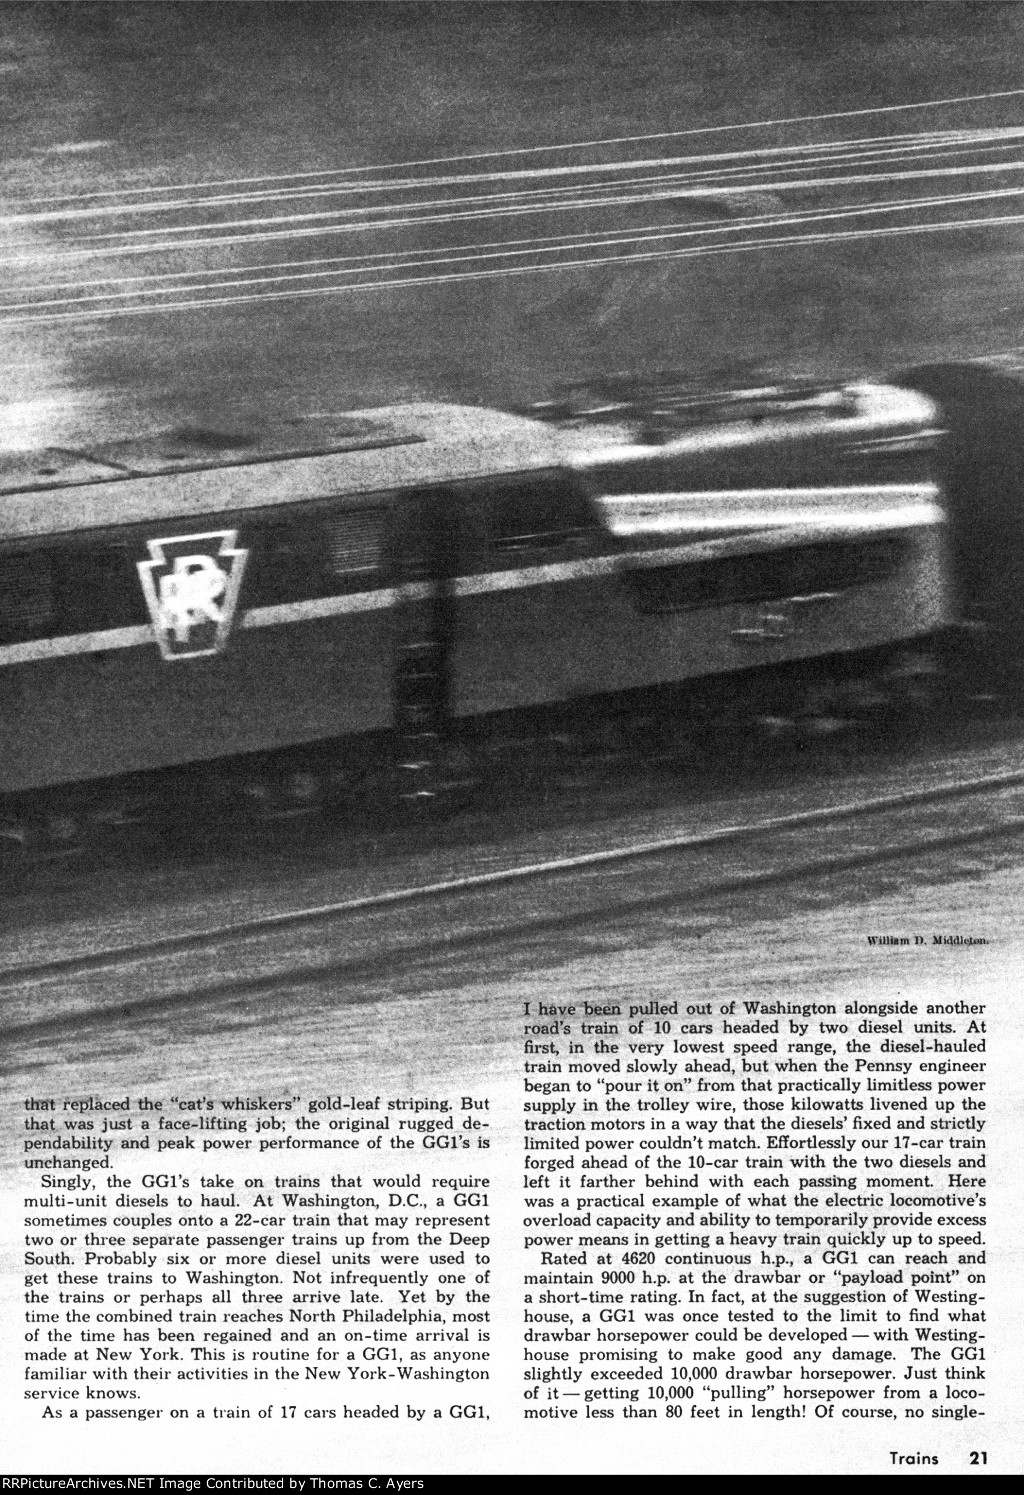 Story Of The GG-1, Page 21, 1964